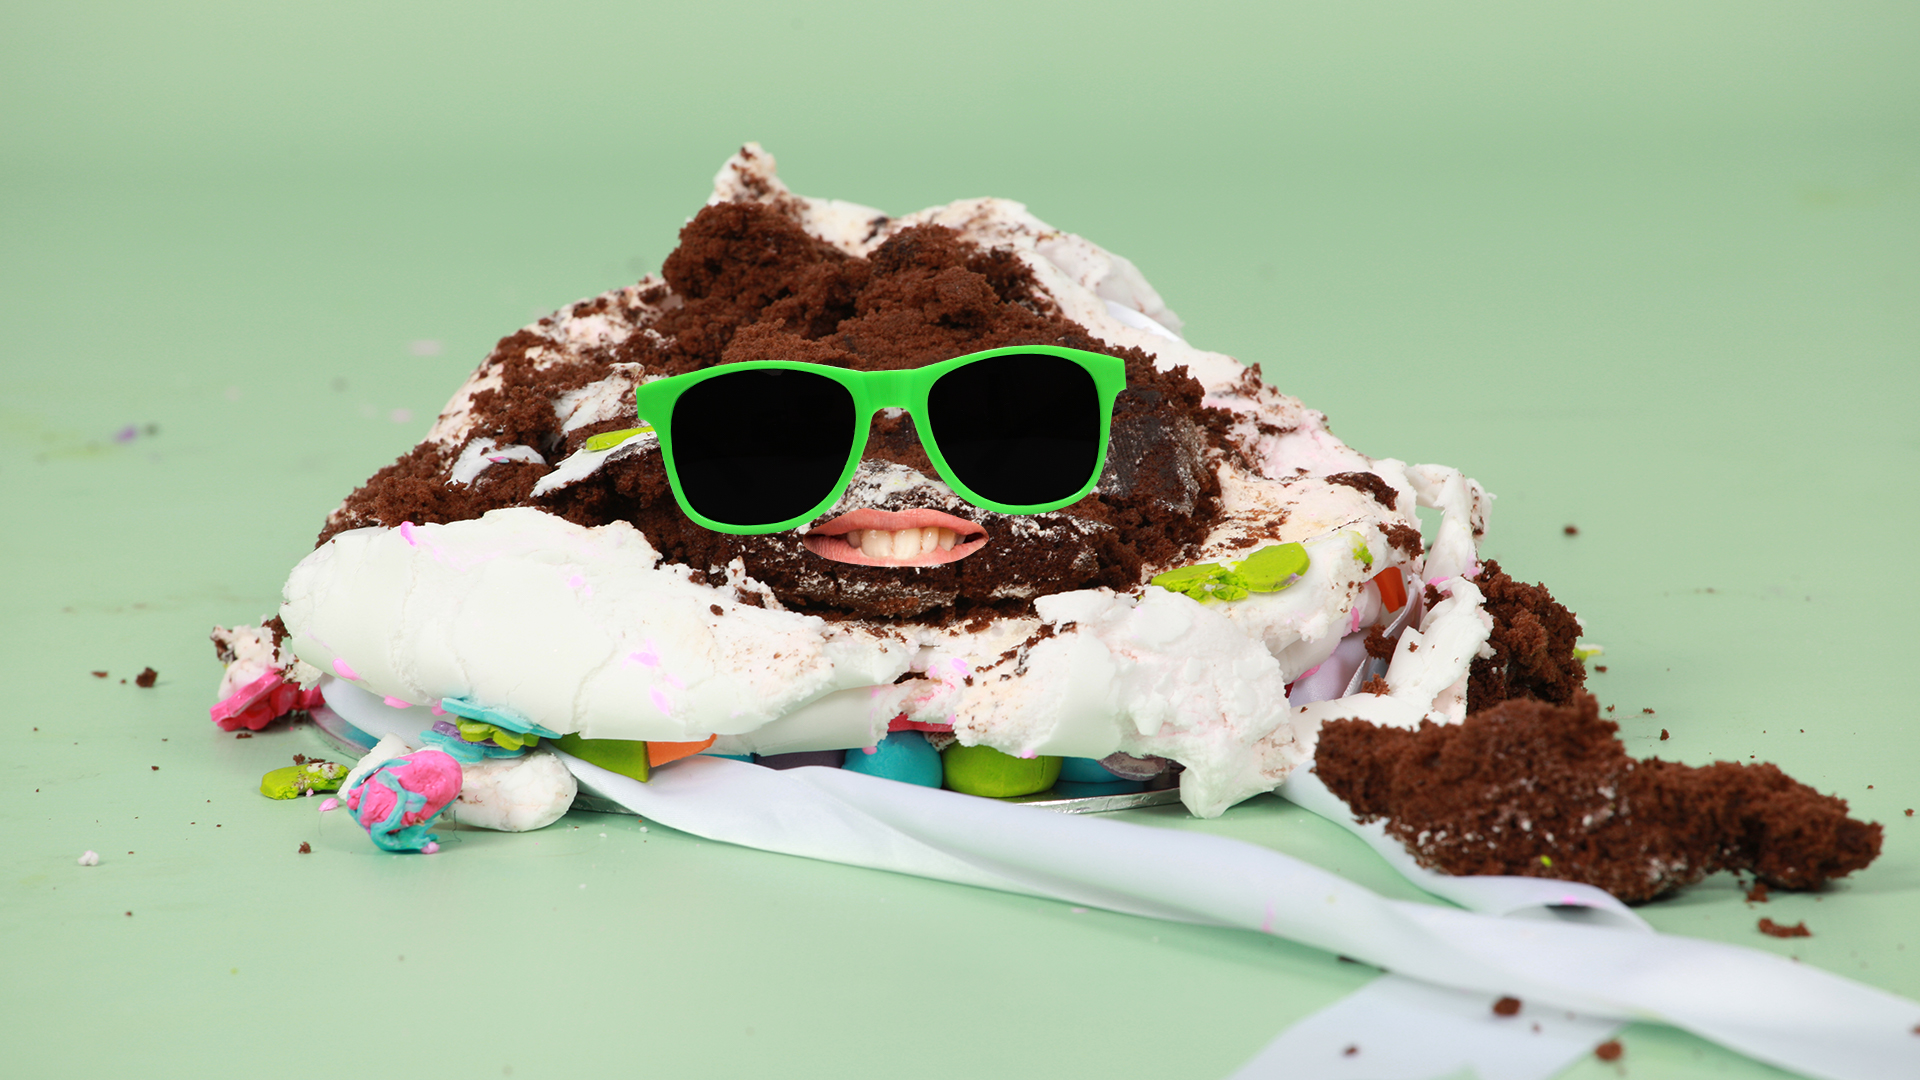 A smiling chocolate cake that is wearing sunglasses